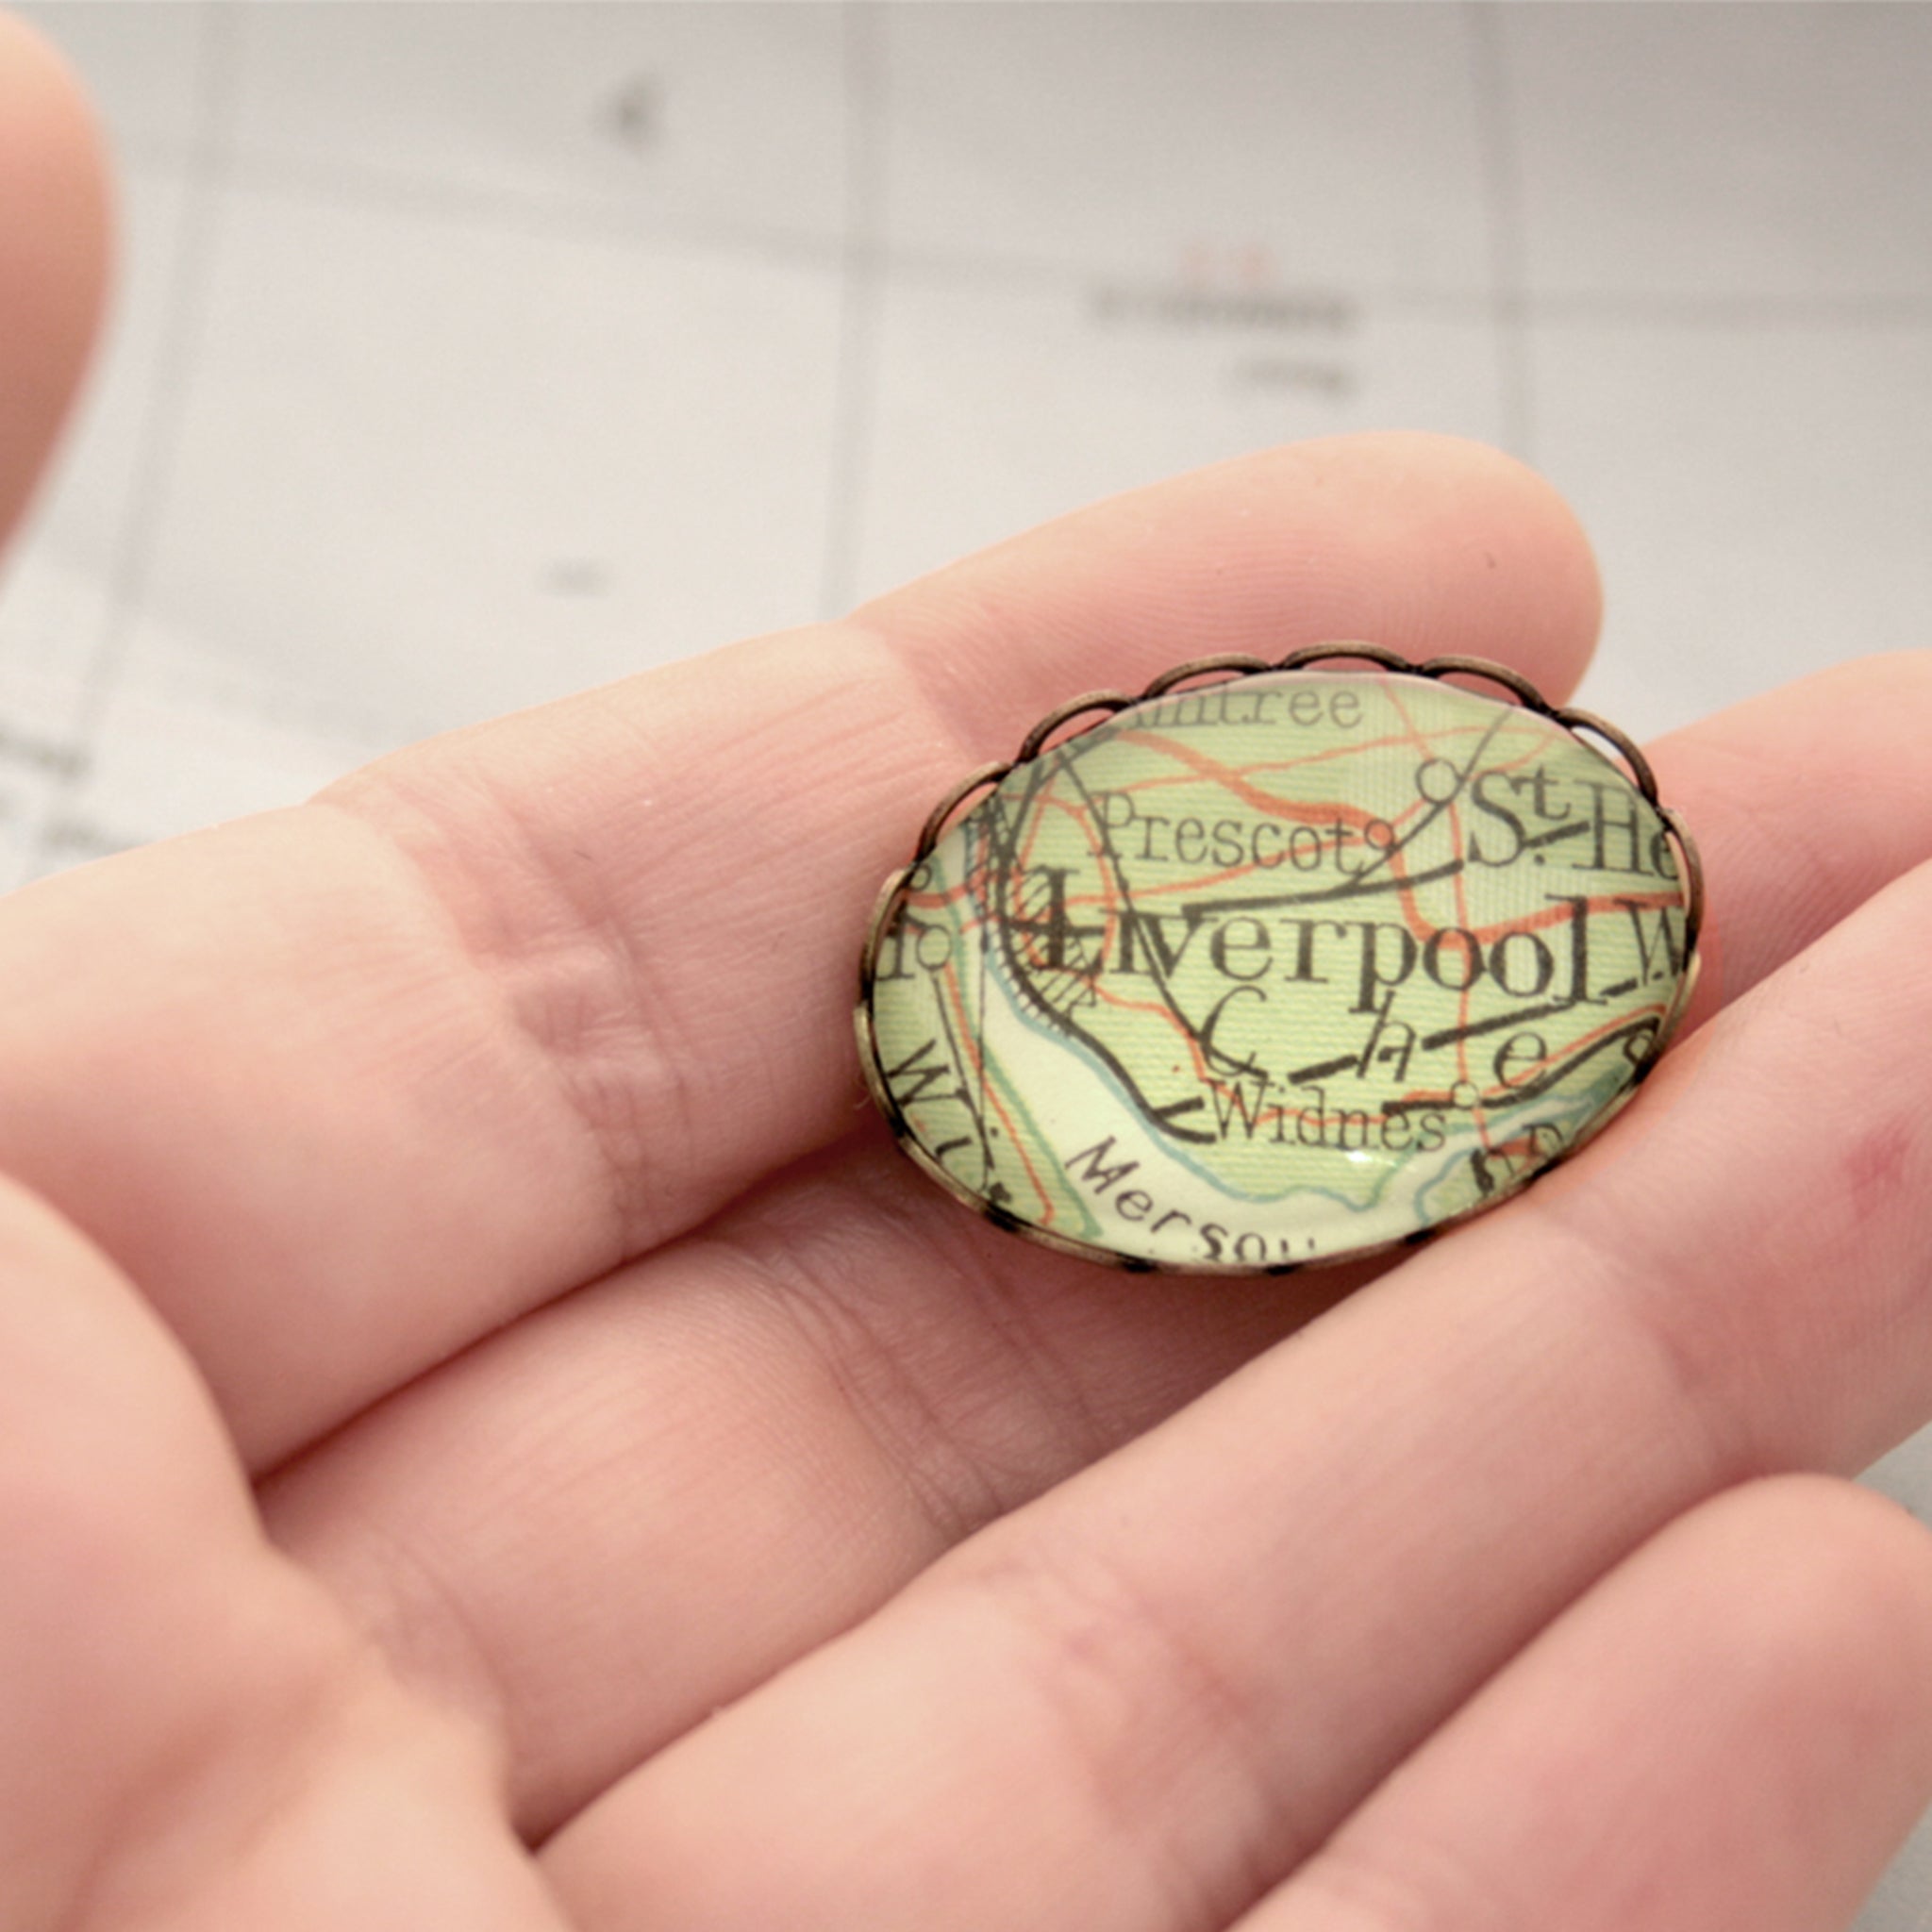 Antique Bronze brooch featuring map of Liverpool lying on hand